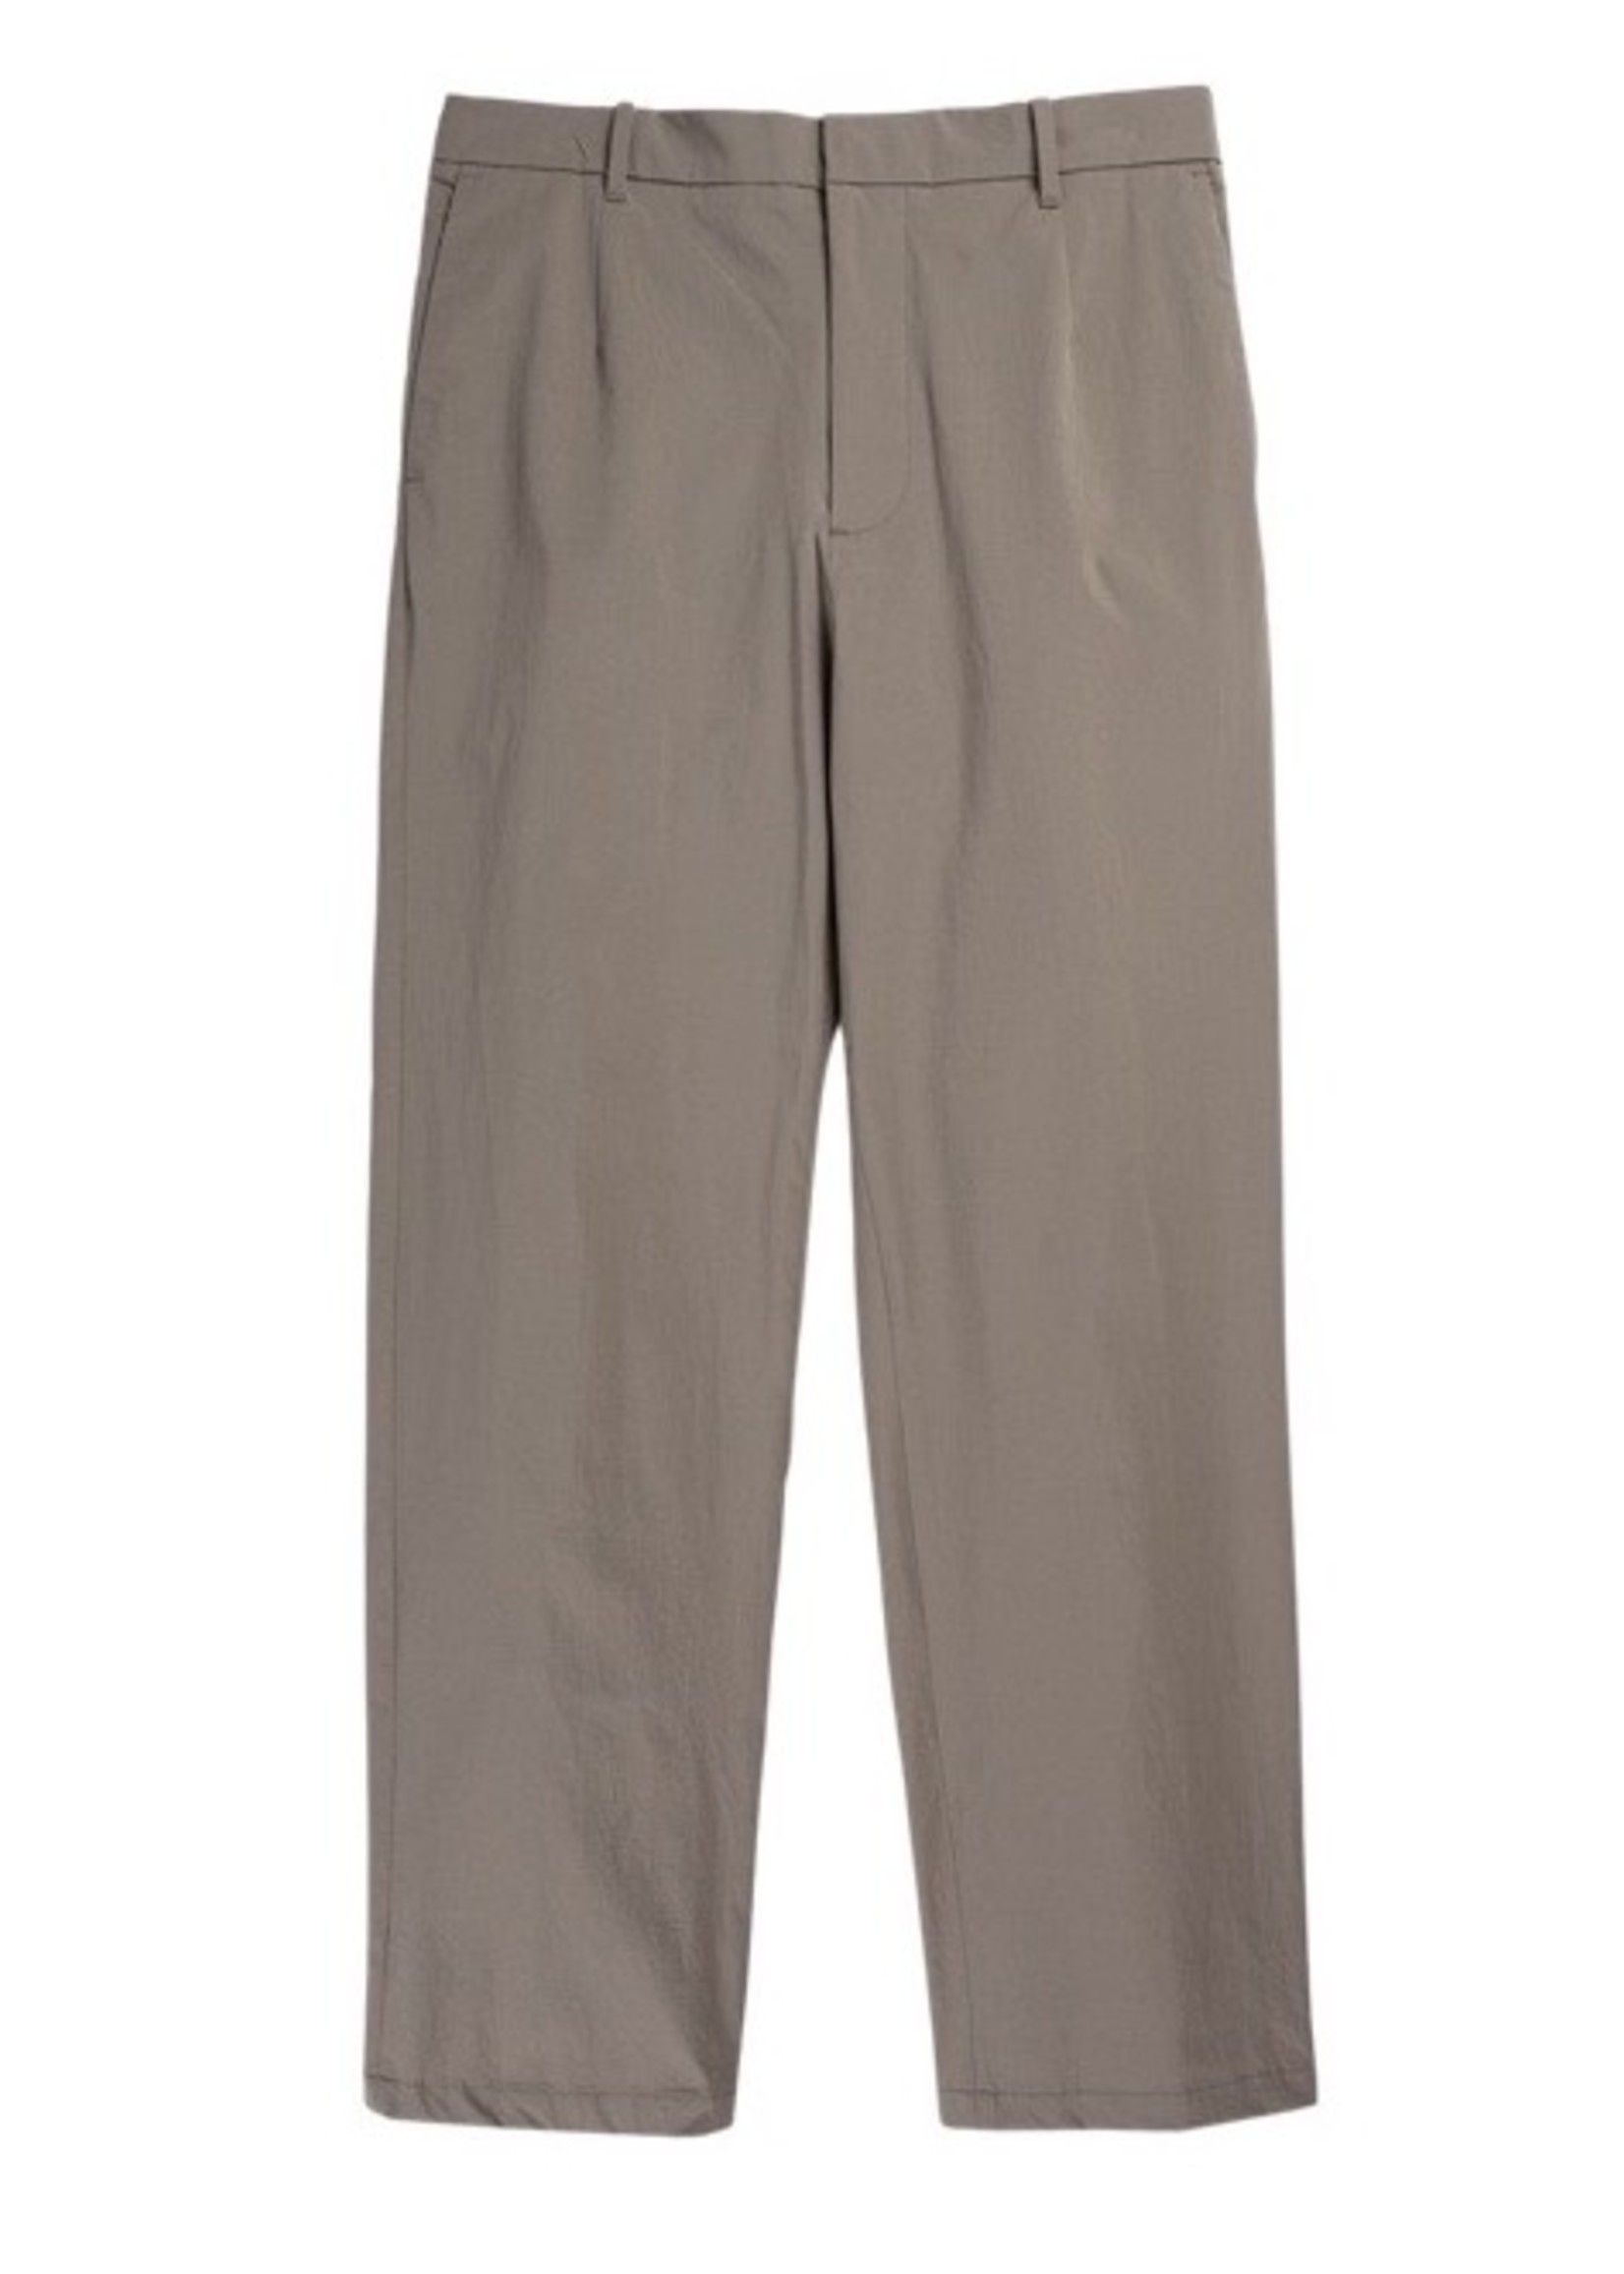 NORSE PROJECTS AAREN TRAVEL PANT